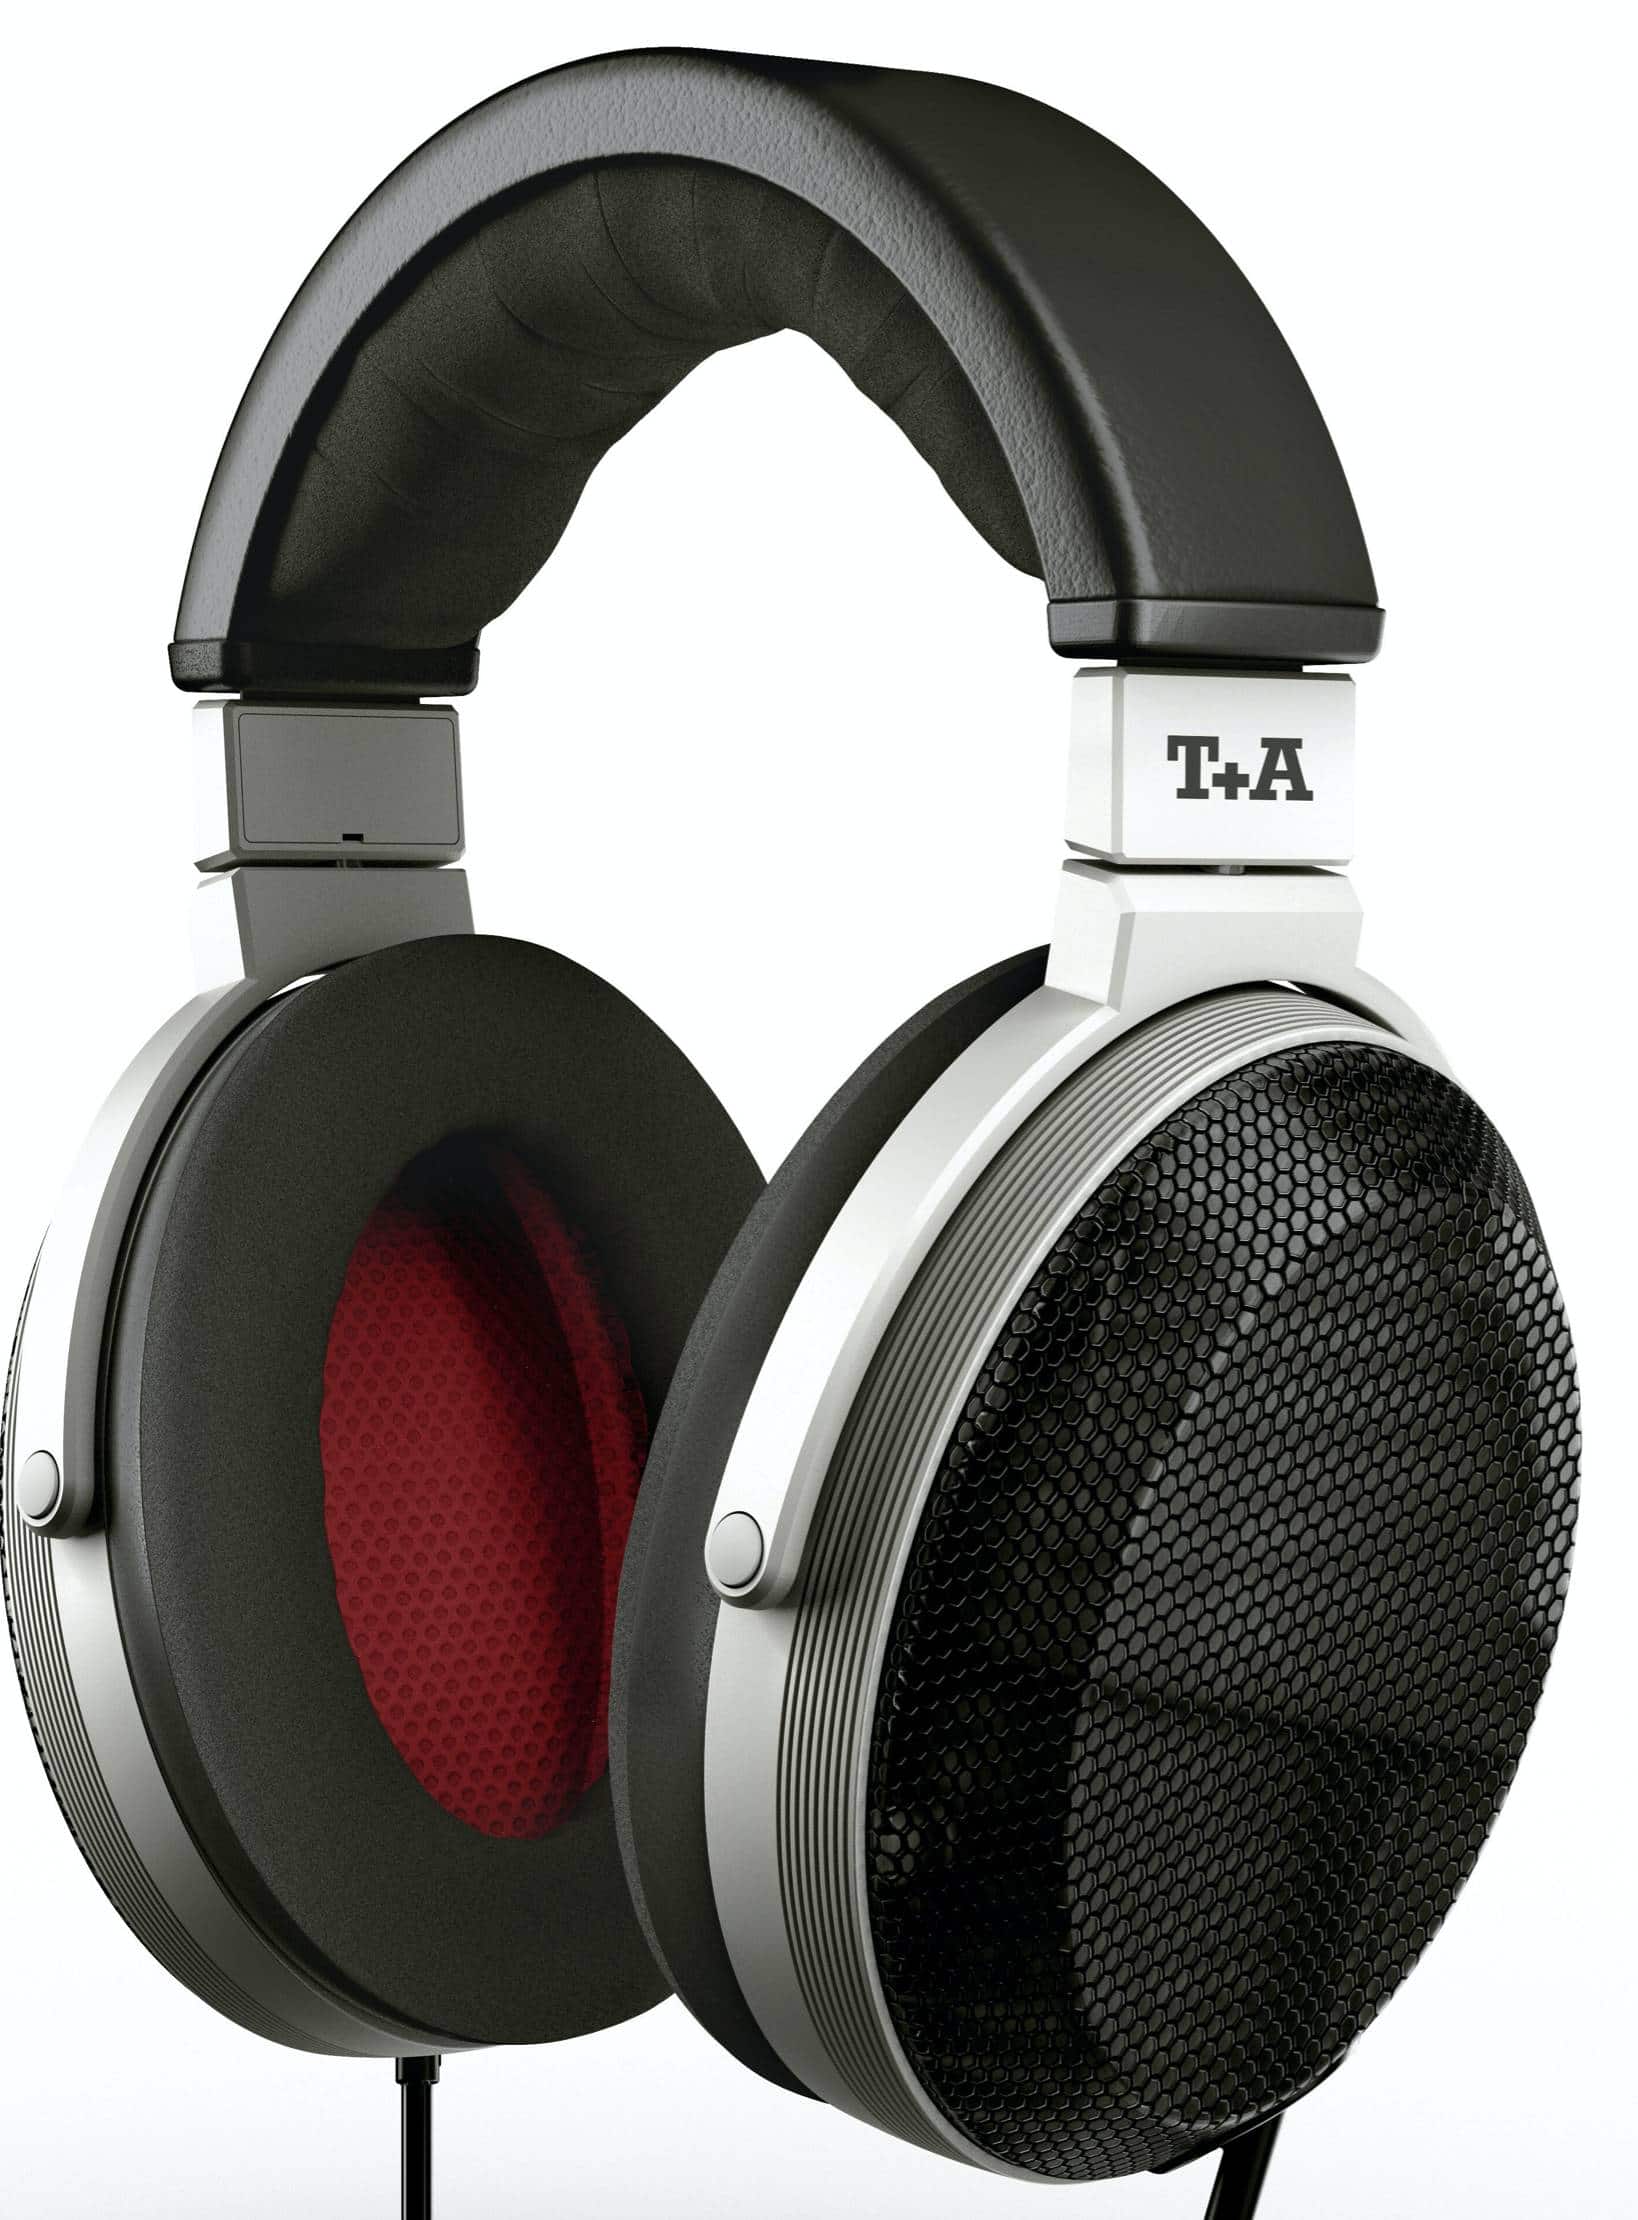 Solitaire P Headphones and Head Amplifier From T+A